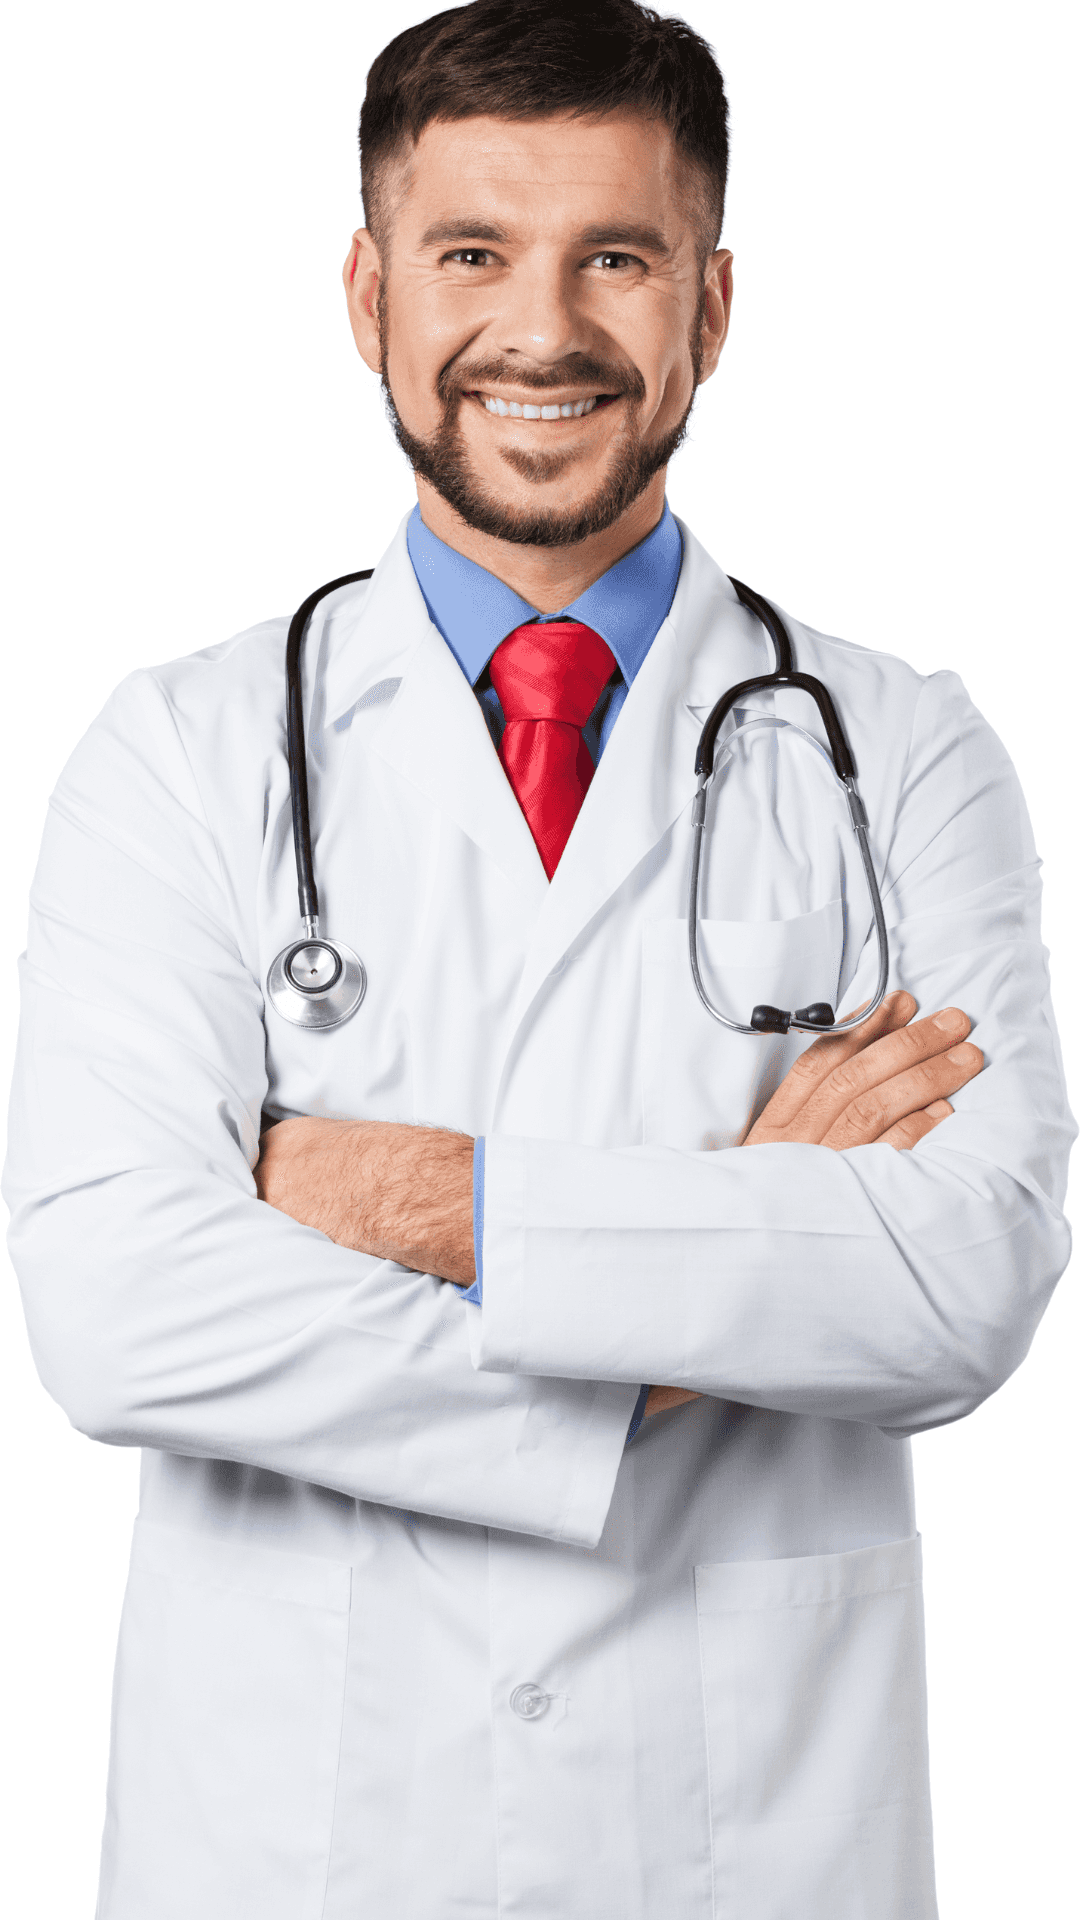 Smiling Male Doctor With Stethoscope